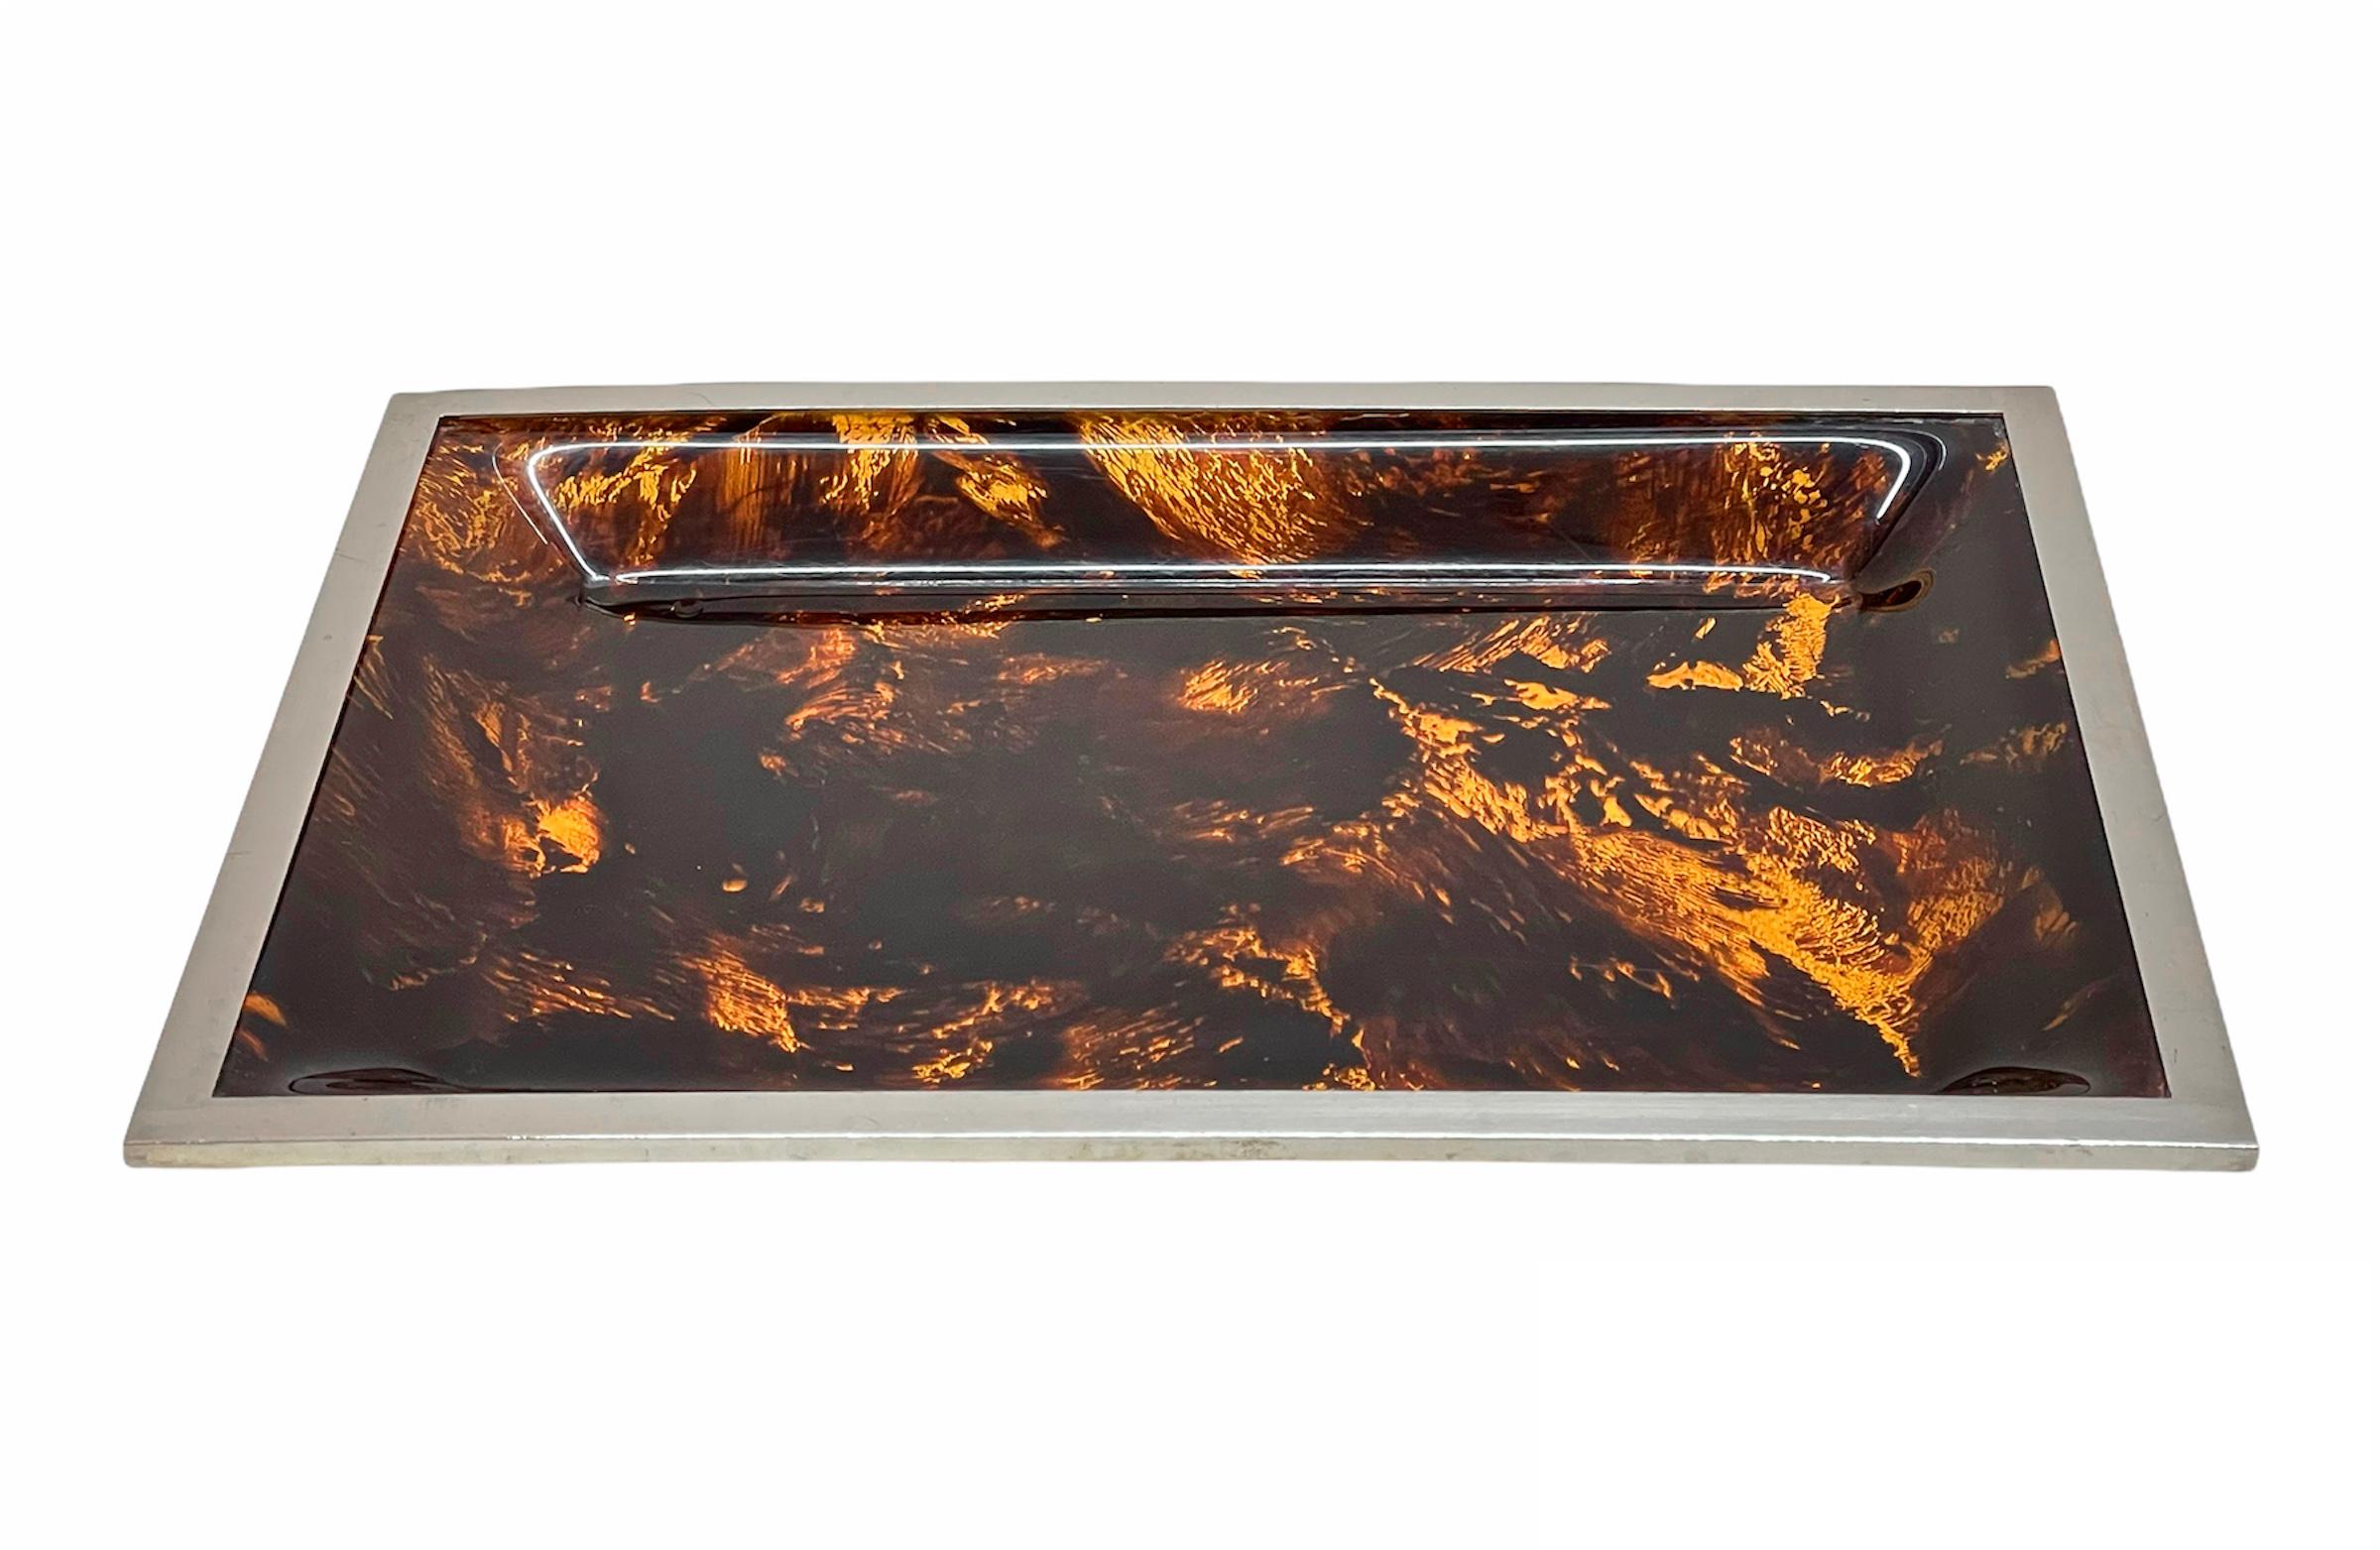 Mid-Century Modern Midcentury Tortoiseshell Plexiglass Italian Serving Tray after Willy Rizzo 1970s For Sale